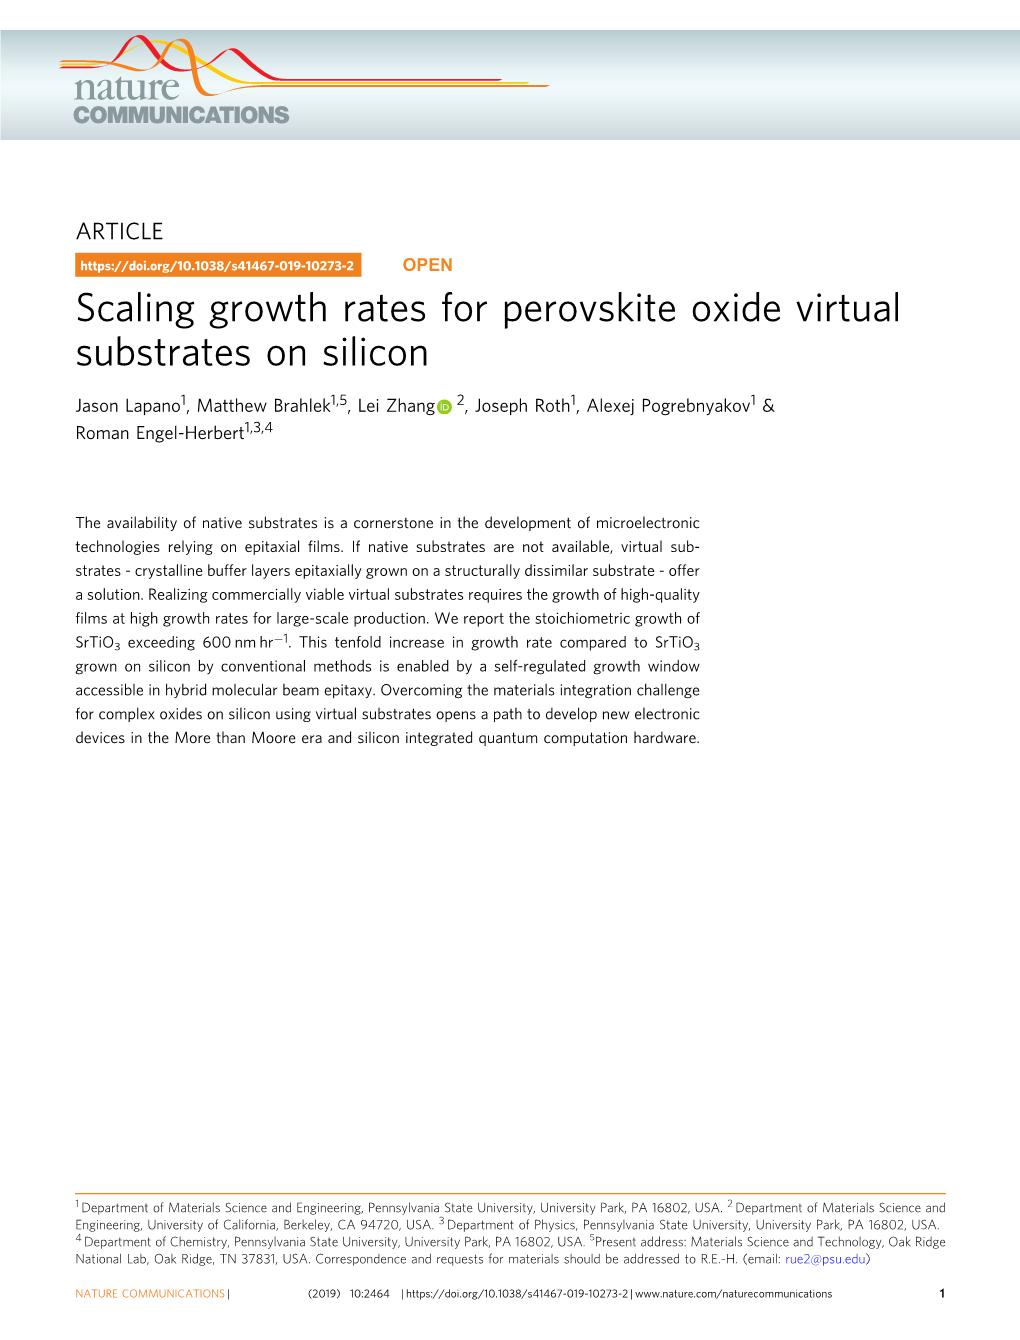 Scaling Growth Rates for Perovskite Oxide Virtual Substrates on Silicon